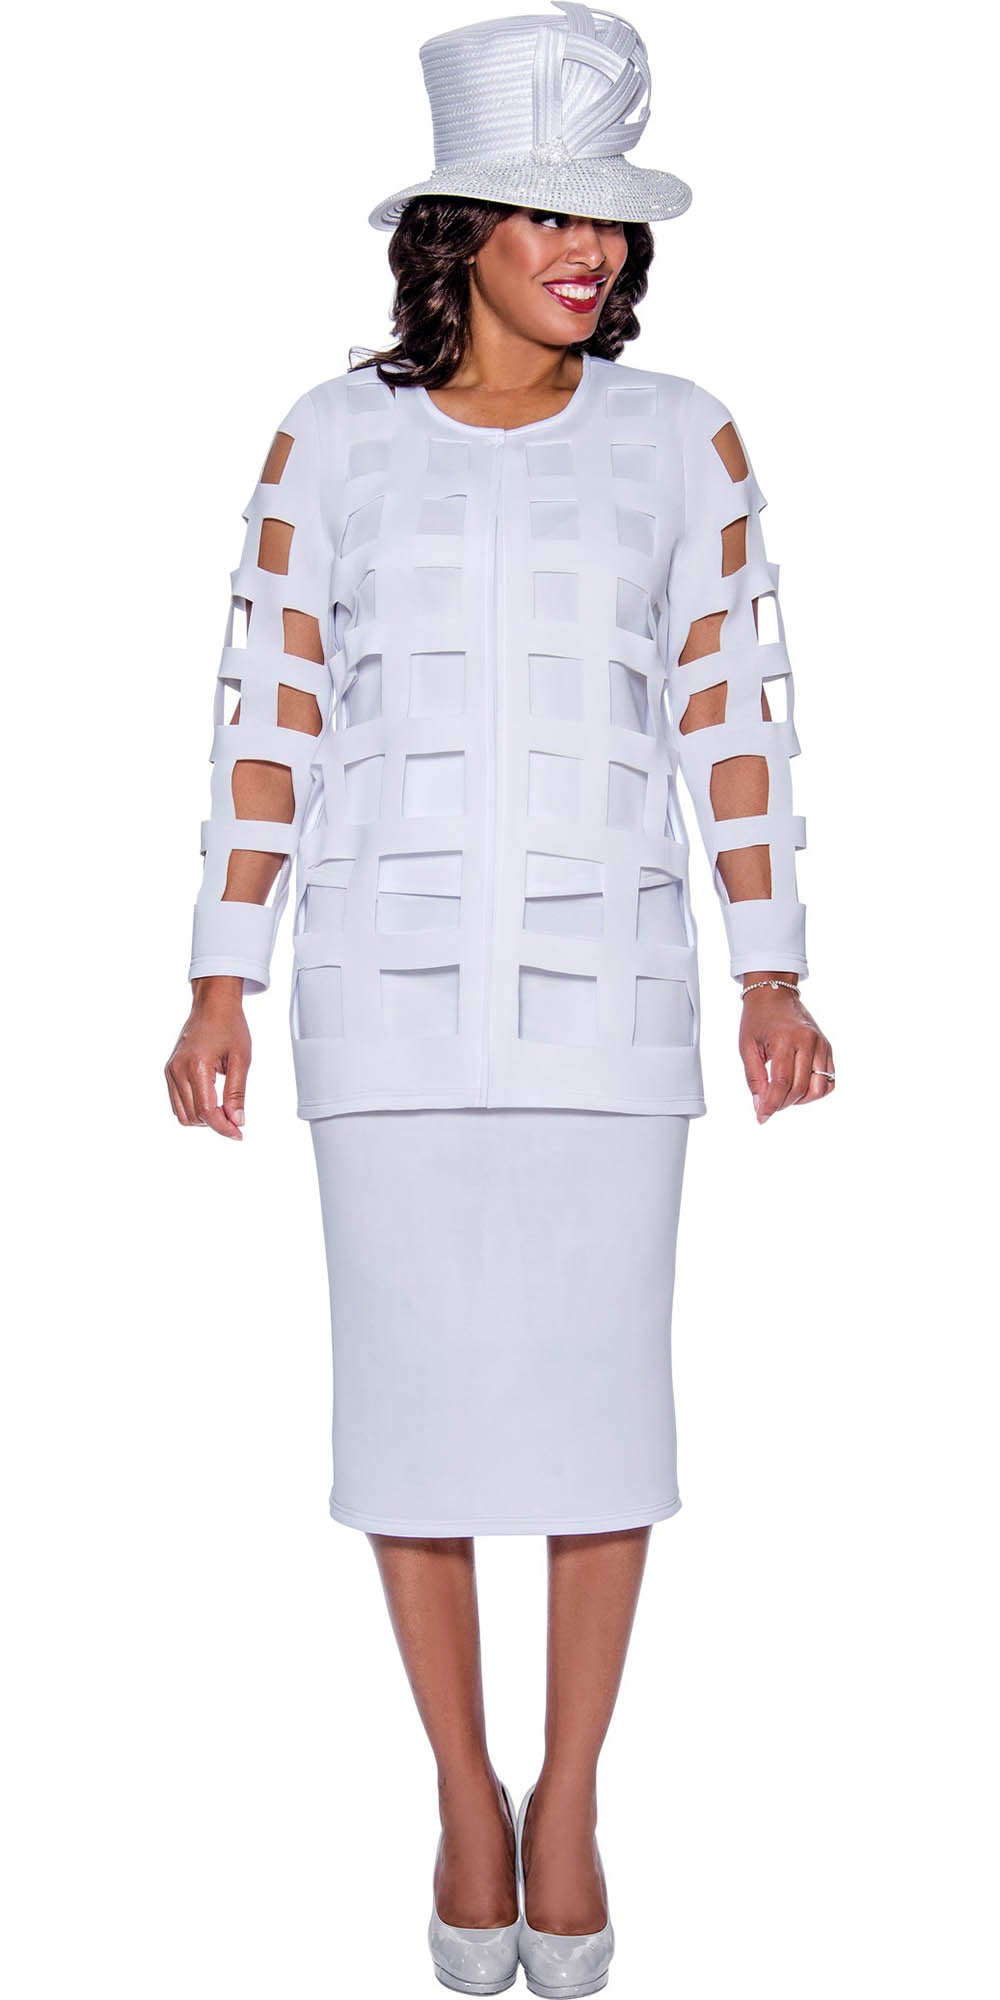 GMI G9203 - White 3PC Skirt Suit with Lattice Cutout Styling